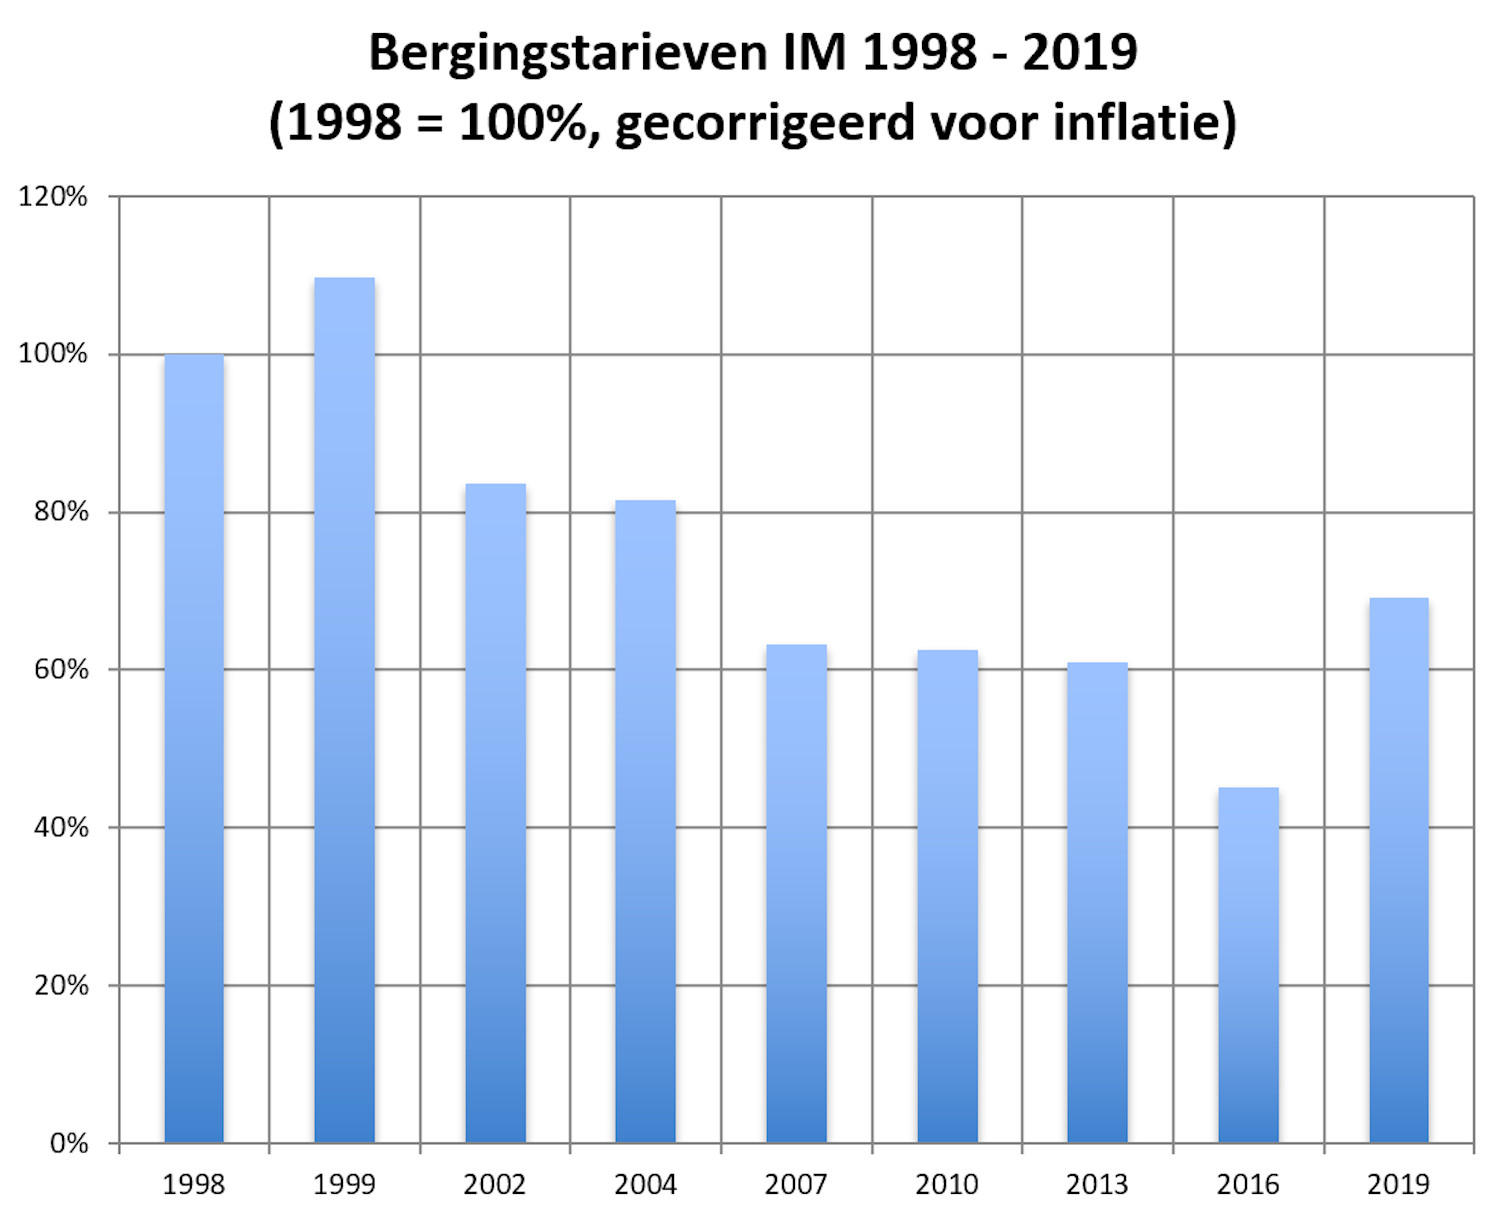 IM Recovery charges 1998-2019 (1998 = 100%, adjusted for inflation)